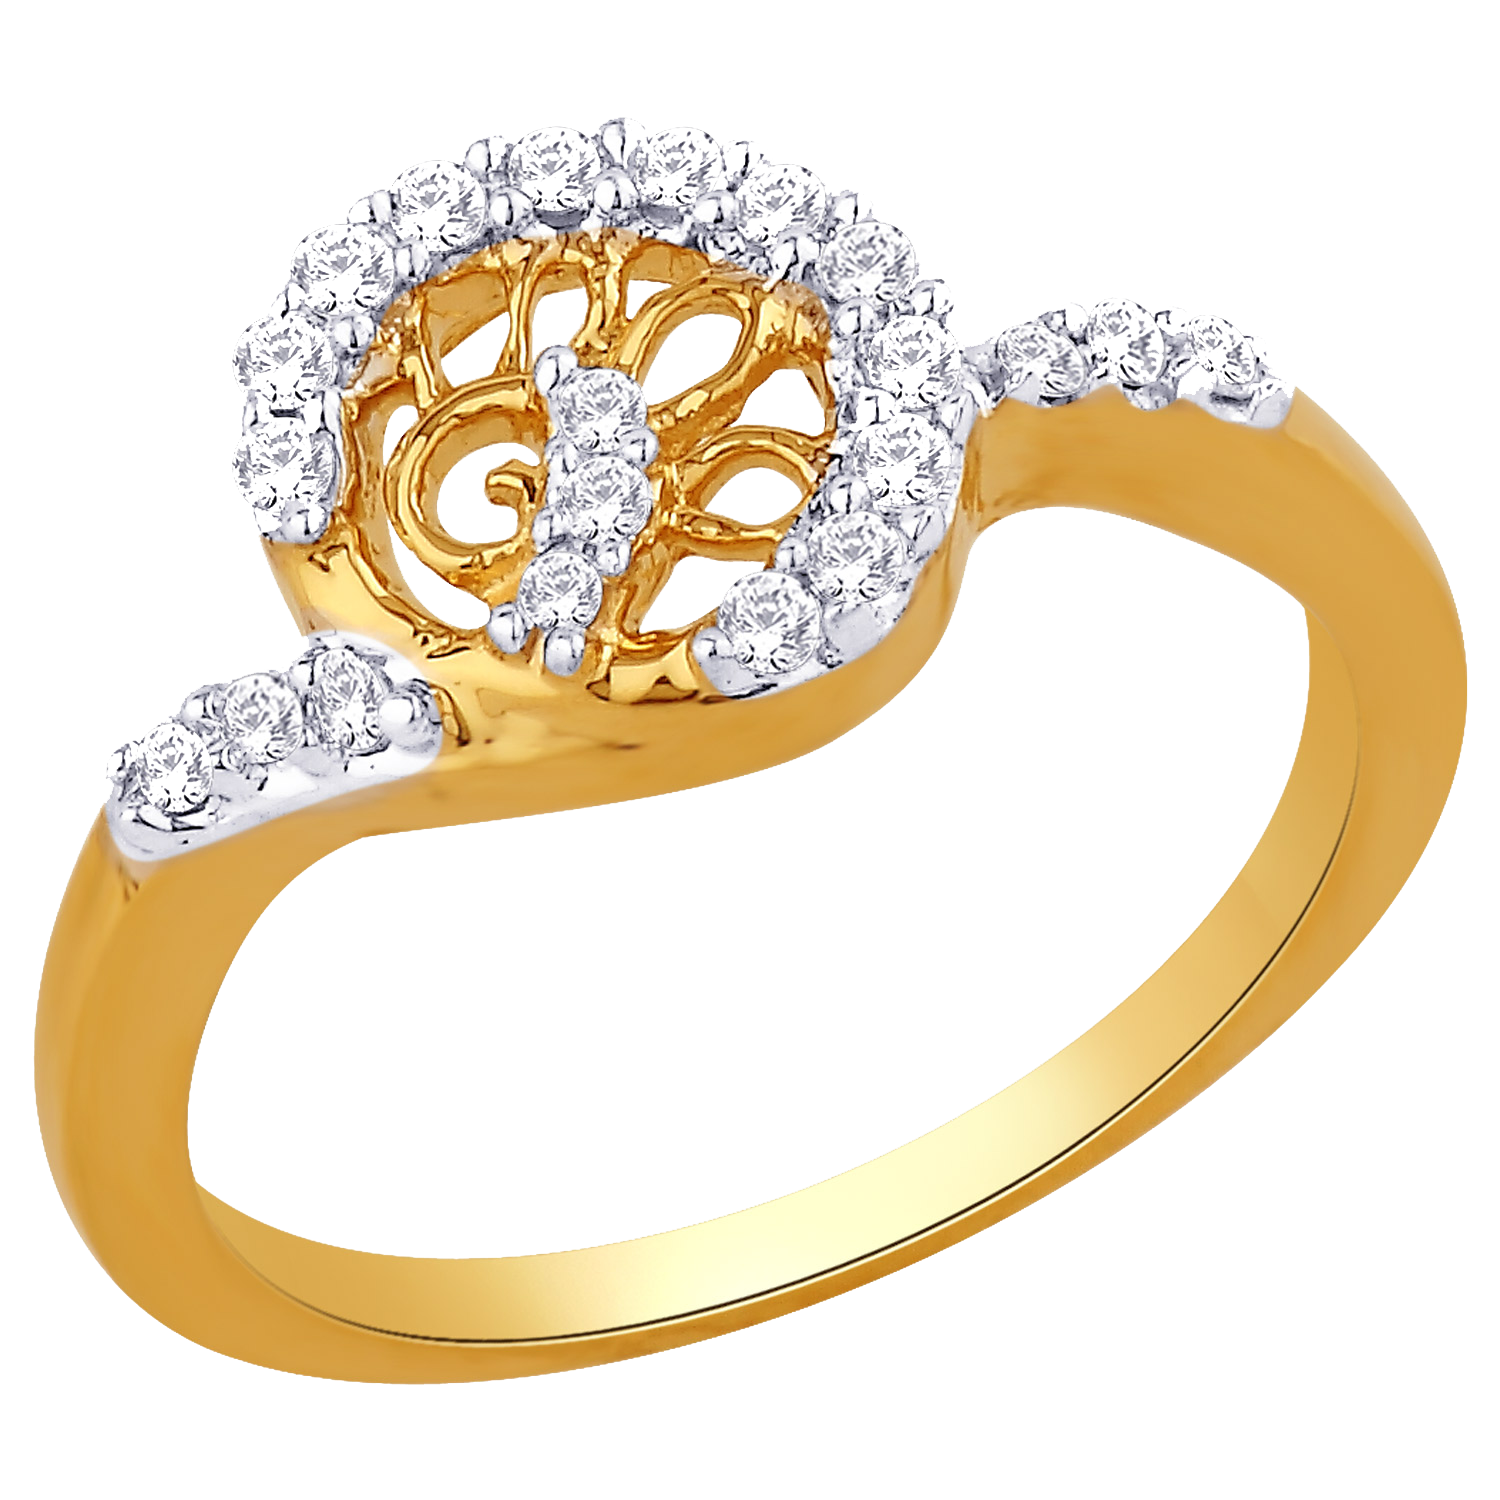 Jewellery Ring Png Hd - Jewellary, Transparent background PNG HD thumbnail